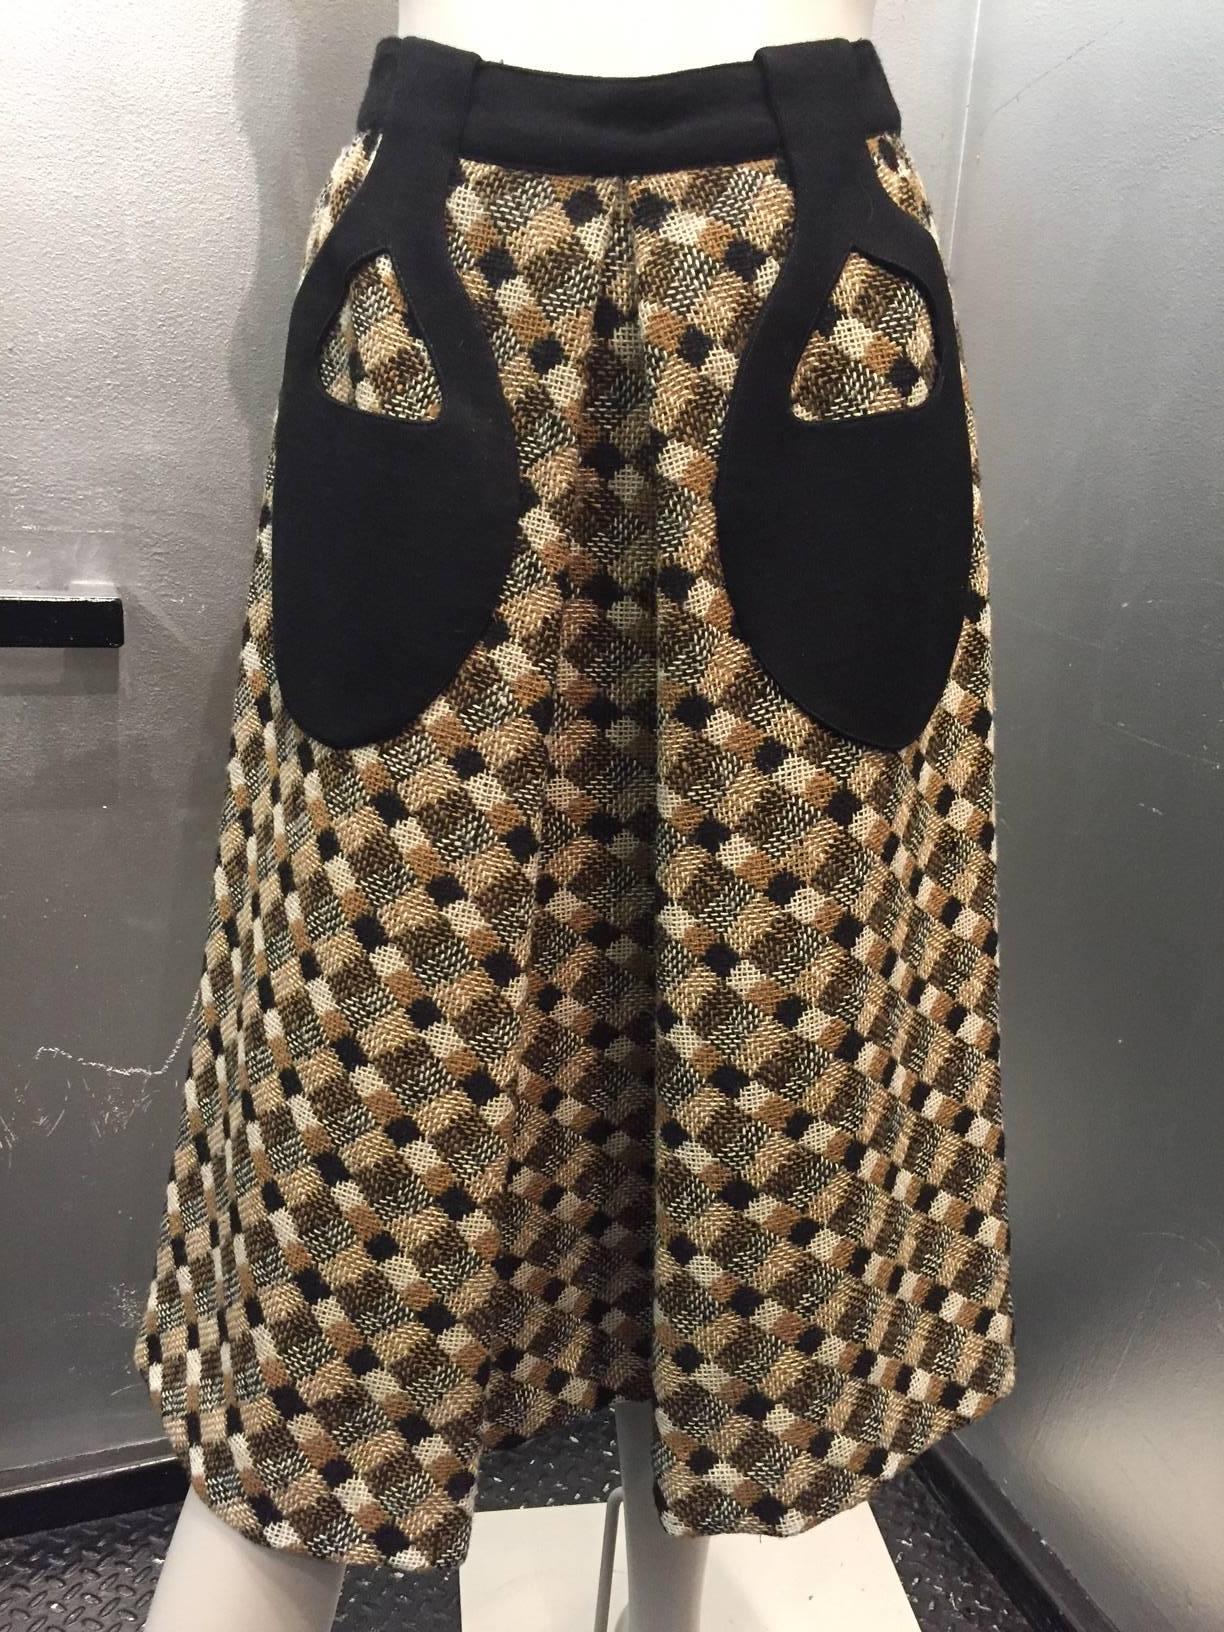 A fantastic 1960s Pierre Cardin black, brown and cream tweed A-line Mod skirt with a deep inverted front pleat and backed jersey teardrop applied patch pockets. 